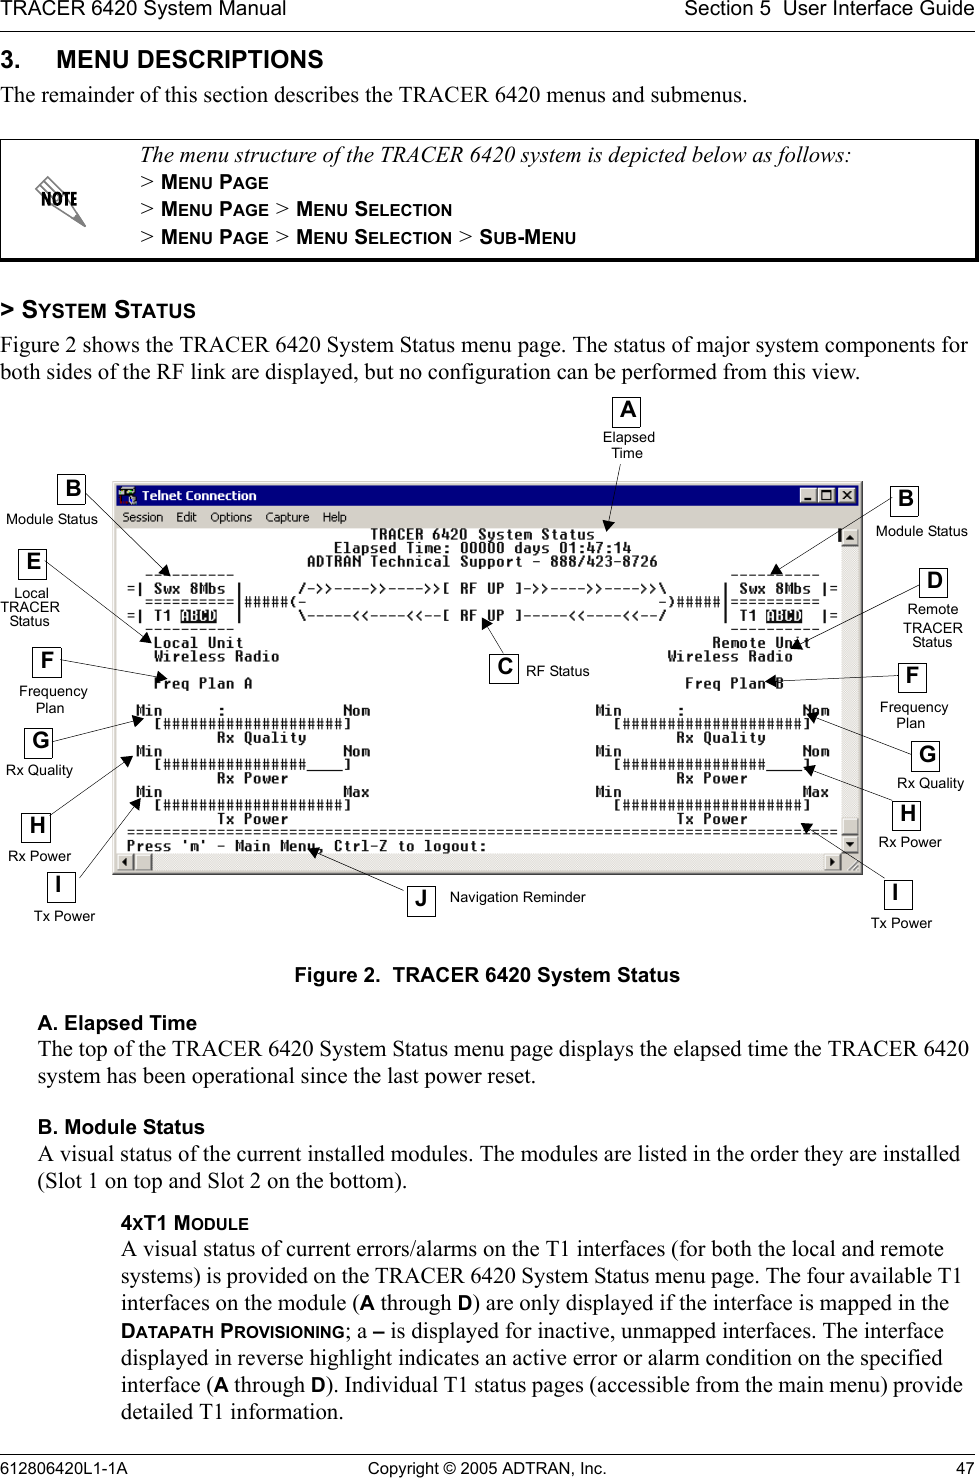 TRACER 6420 System Manual Section 5  User Interface Guide612806420L1-1A Copyright © 2005 ADTRAN, Inc. 473. MENU DESCRIPTIONSThe remainder of this section describes the TRACER 6420 menus and submenus. &gt; SYSTEM STATUSFigure 2 shows the TRACER 6420 System Status menu page. The status of major system components for both sides of the RF link are displayed, but no configuration can be performed from this view.Figure 2.  TRACER 6420 System StatusA. Elapsed TimeThe top of the TRACER 6420 System Status menu page displays the elapsed time the TRACER 6420 system has been operational since the last power reset.B. Module StatusA visual status of the current installed modules. The modules are listed in the order they are installed (Slot 1 on top and Slot 2 on the bottom).The menu structure of the TRACER 6420 system is depicted below as follows: &gt; MENU PAGE &gt; MENU PAGE &gt; MENU SELECTION &gt; MENU PAGE &gt; MENU SELECTION &gt; SUB-MENU4XT1 MODULE A visual status of current errors/alarms on the T1 interfaces (for both the local and remote systems) is provided on the TRACER 6420 System Status menu page. The four available T1 interfaces on the module (A through D) are only displayed if the interface is mapped in the DATAPATH PROVISIONING; a – is displayed for inactive, unmapped interfaces. The interface displayed in reverse highlight indicates an active error or alarm condition on the specified interface (A through D). Individual T1 status pages (accessible from the main menu) provide detailed T1 information.AElapsedTimeEFCRF StatusDRemoteFHRx PowerITx PowerITx Power JNavigation ReminderTRACERPlan FrequencyPlanStatusGGModule StatusBLocalFrequencyHRx PowerModule StatusStatus TRACERRx QualityRx QualityB